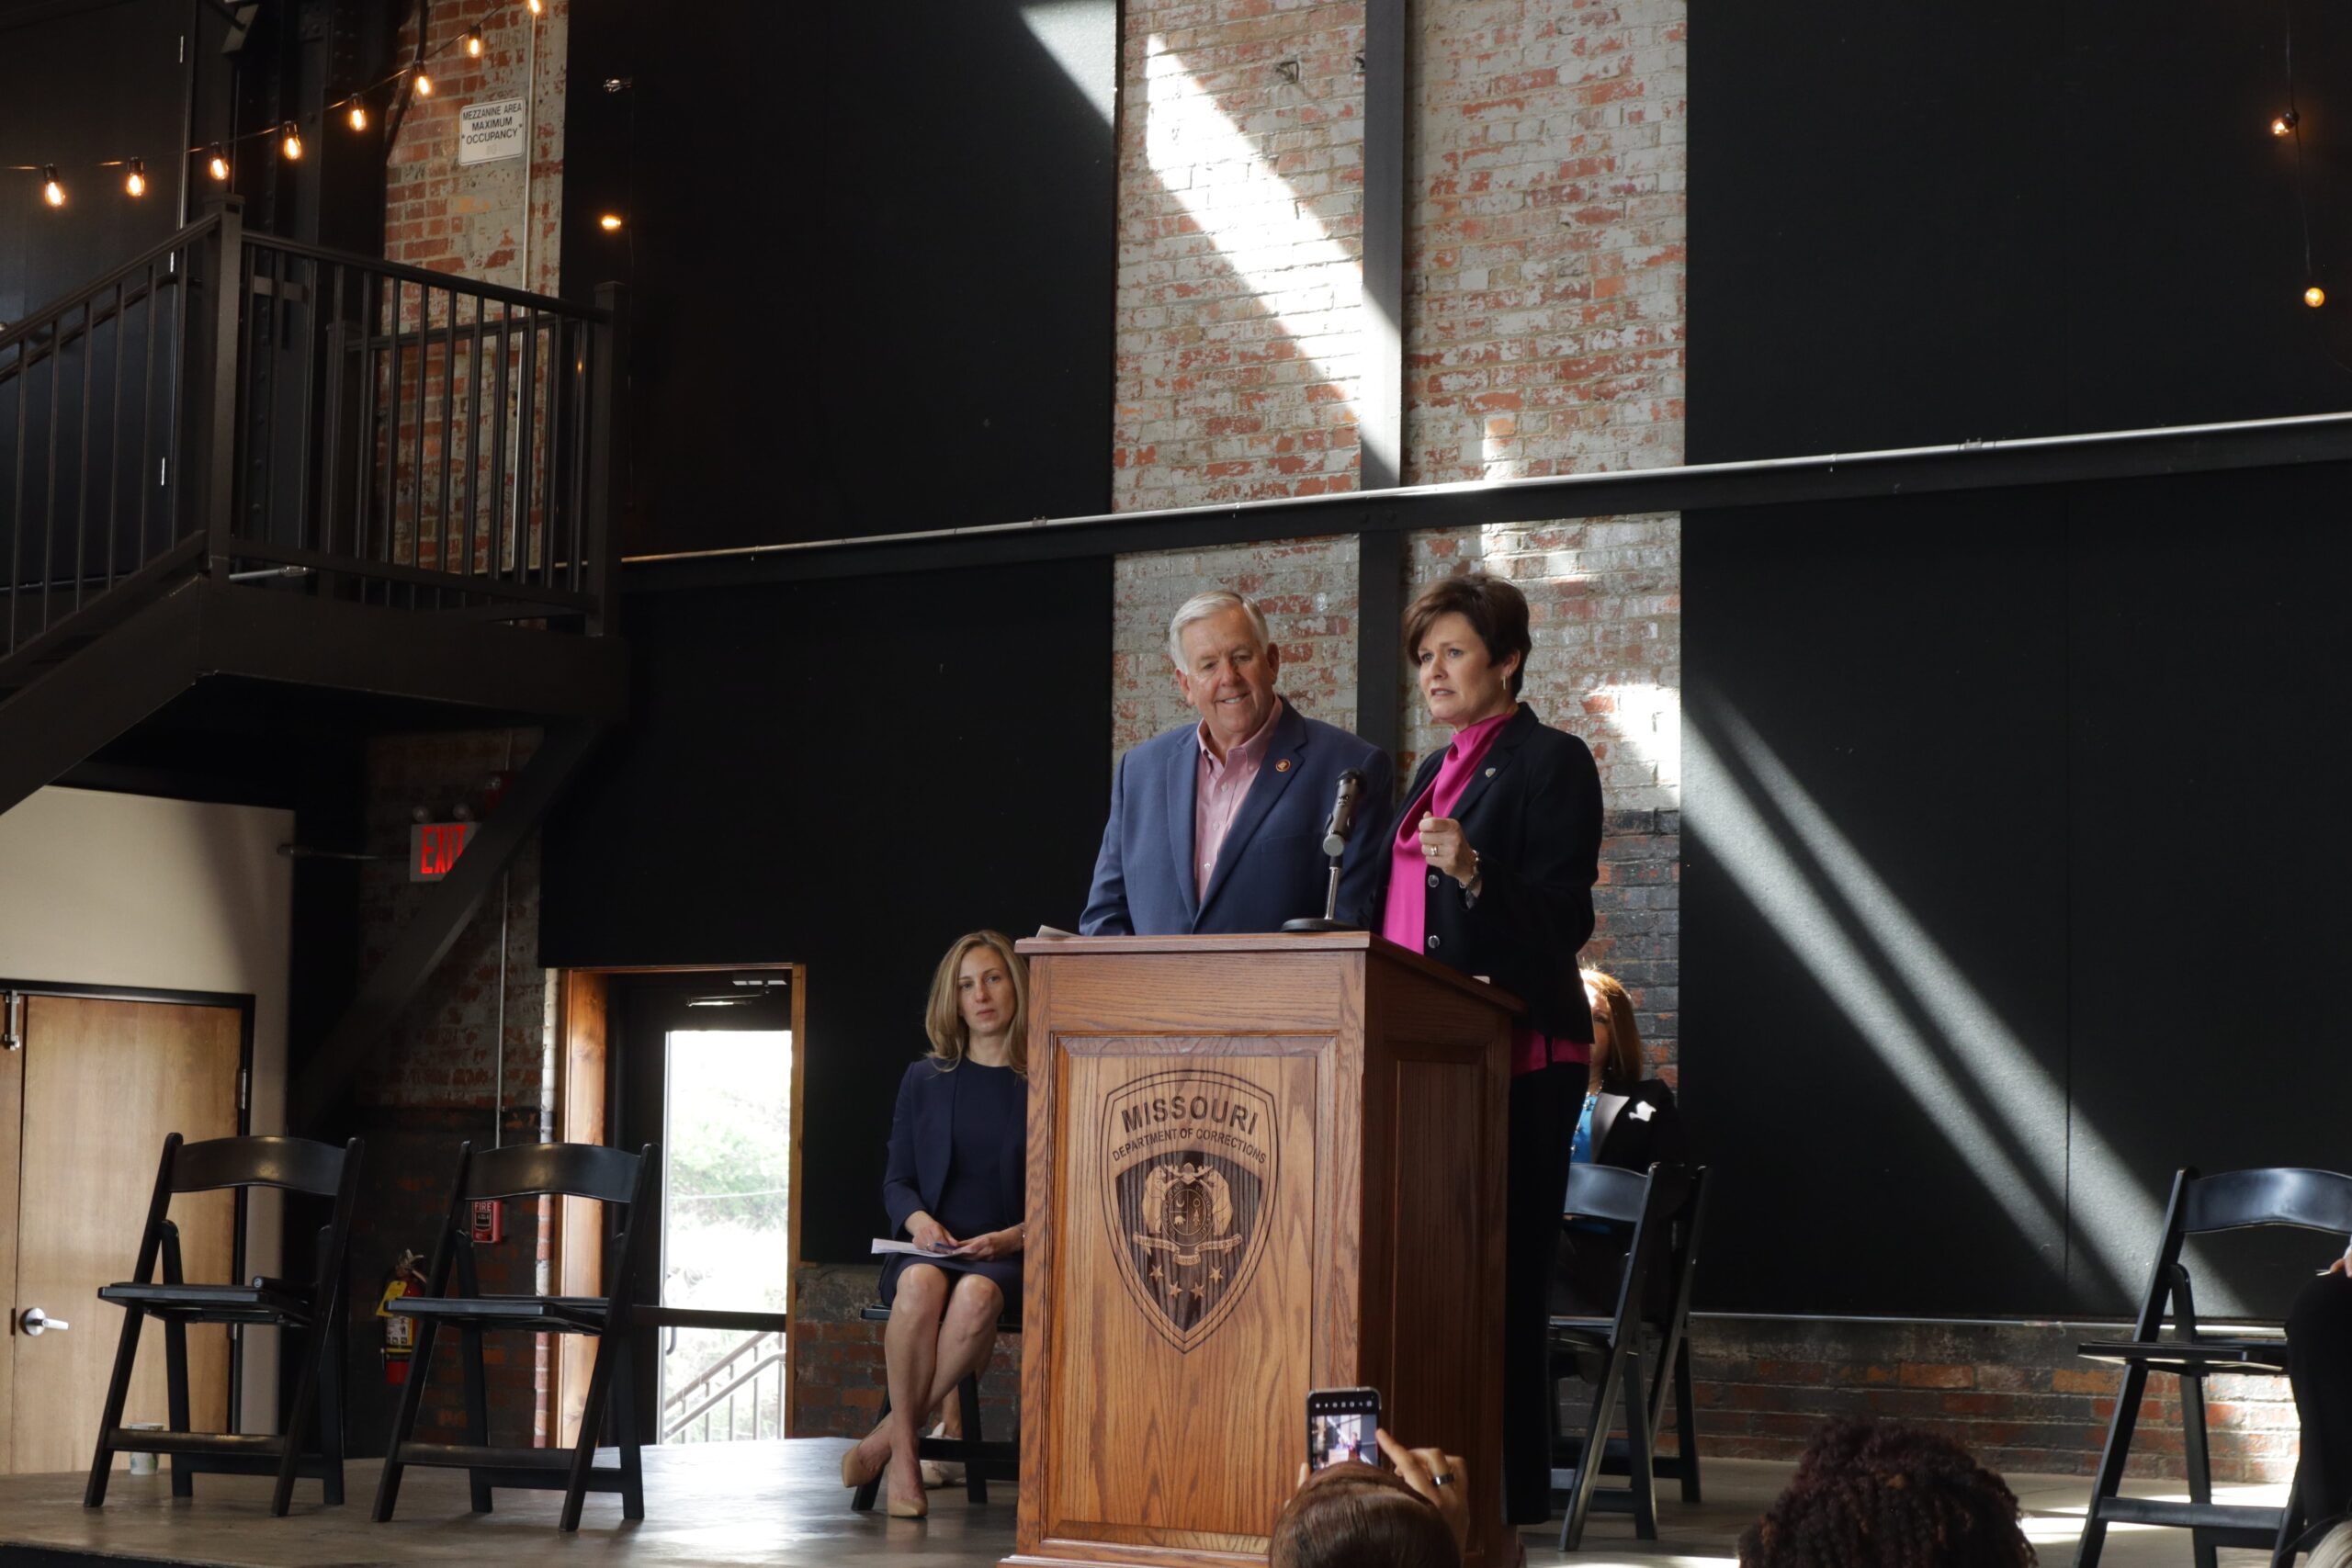 Missouri Governor Mike Parson and former Department of Corrections Director Anne Precythe speak at the Reentry 2030 launch event